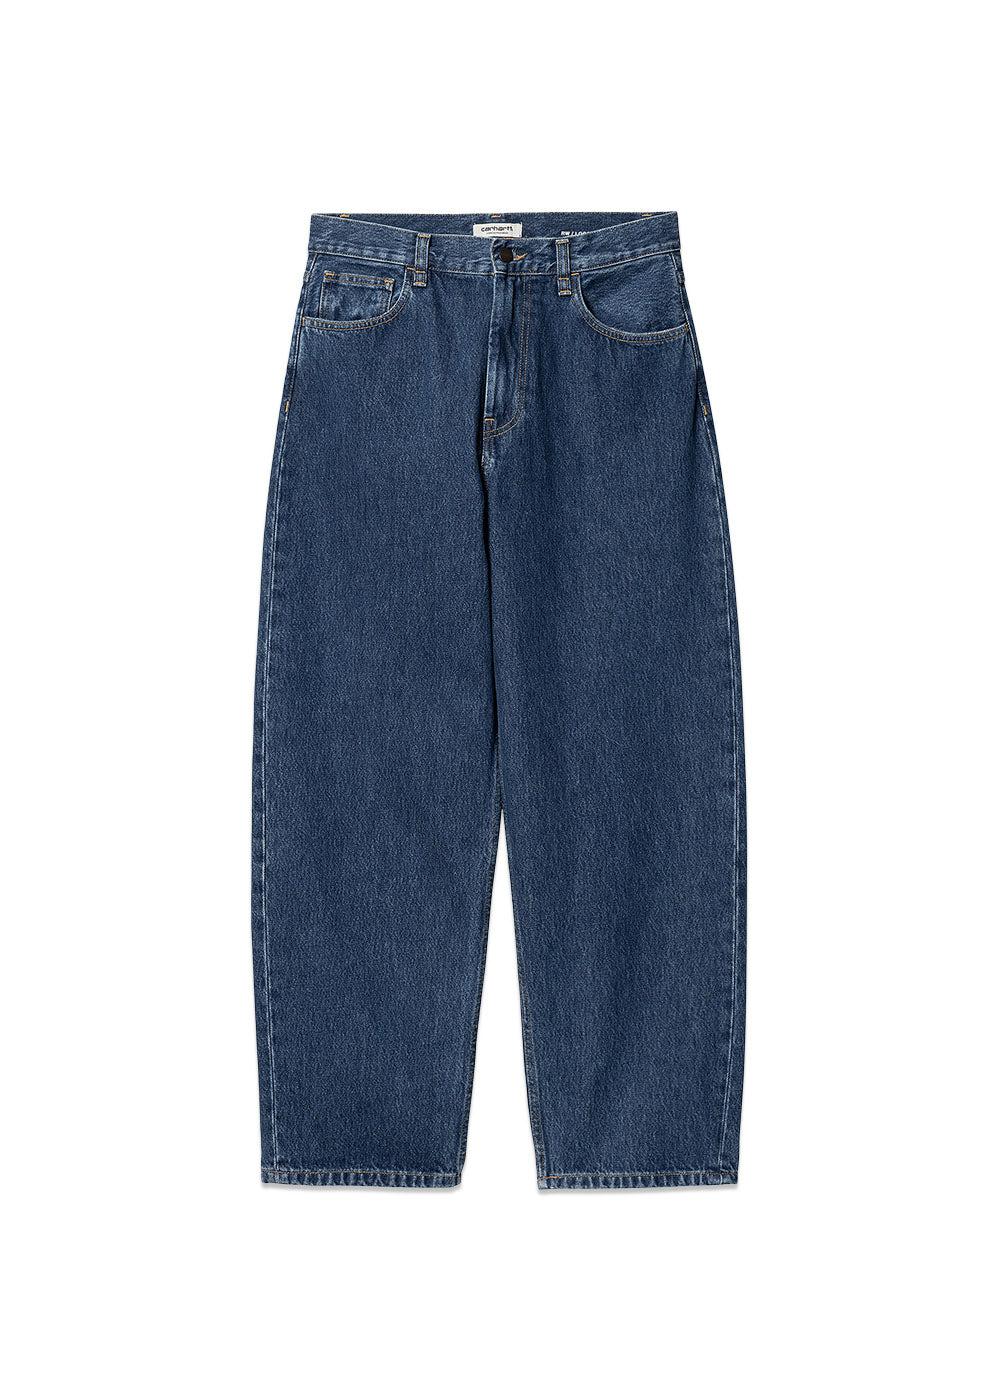 Carhartt WIP's W' Brandon Pant - Blue Stone Washed. Køb jeans her.